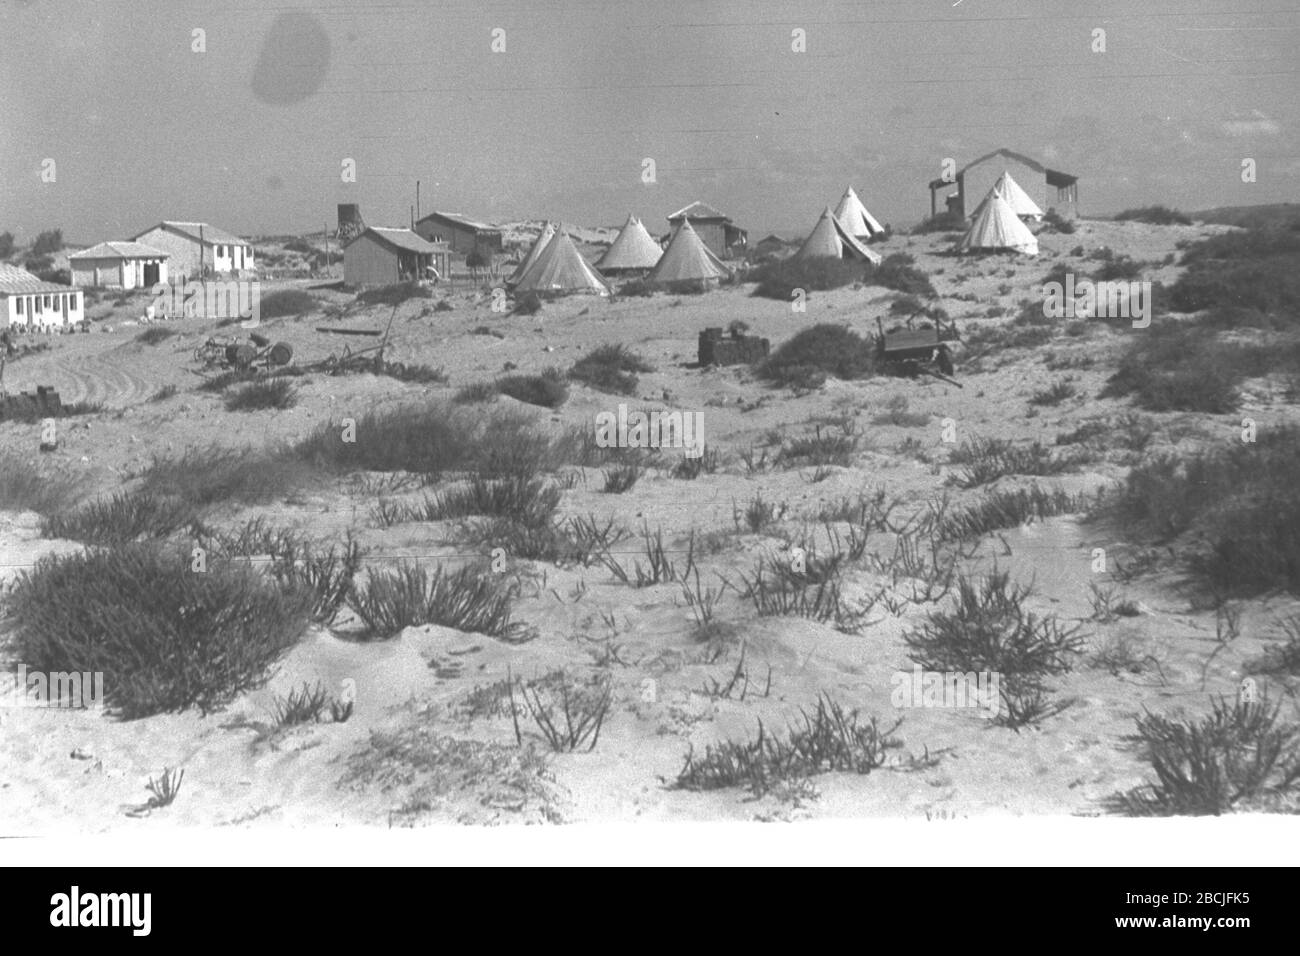 English Kibbutz Sdot Yam Near Caesarea Ss O E I C I I O U U O I Ss O O I 30 October 1944 This Is Available From National Photo Collection Of Israel Photography Dept Goverment Press Office Link Under The Digital